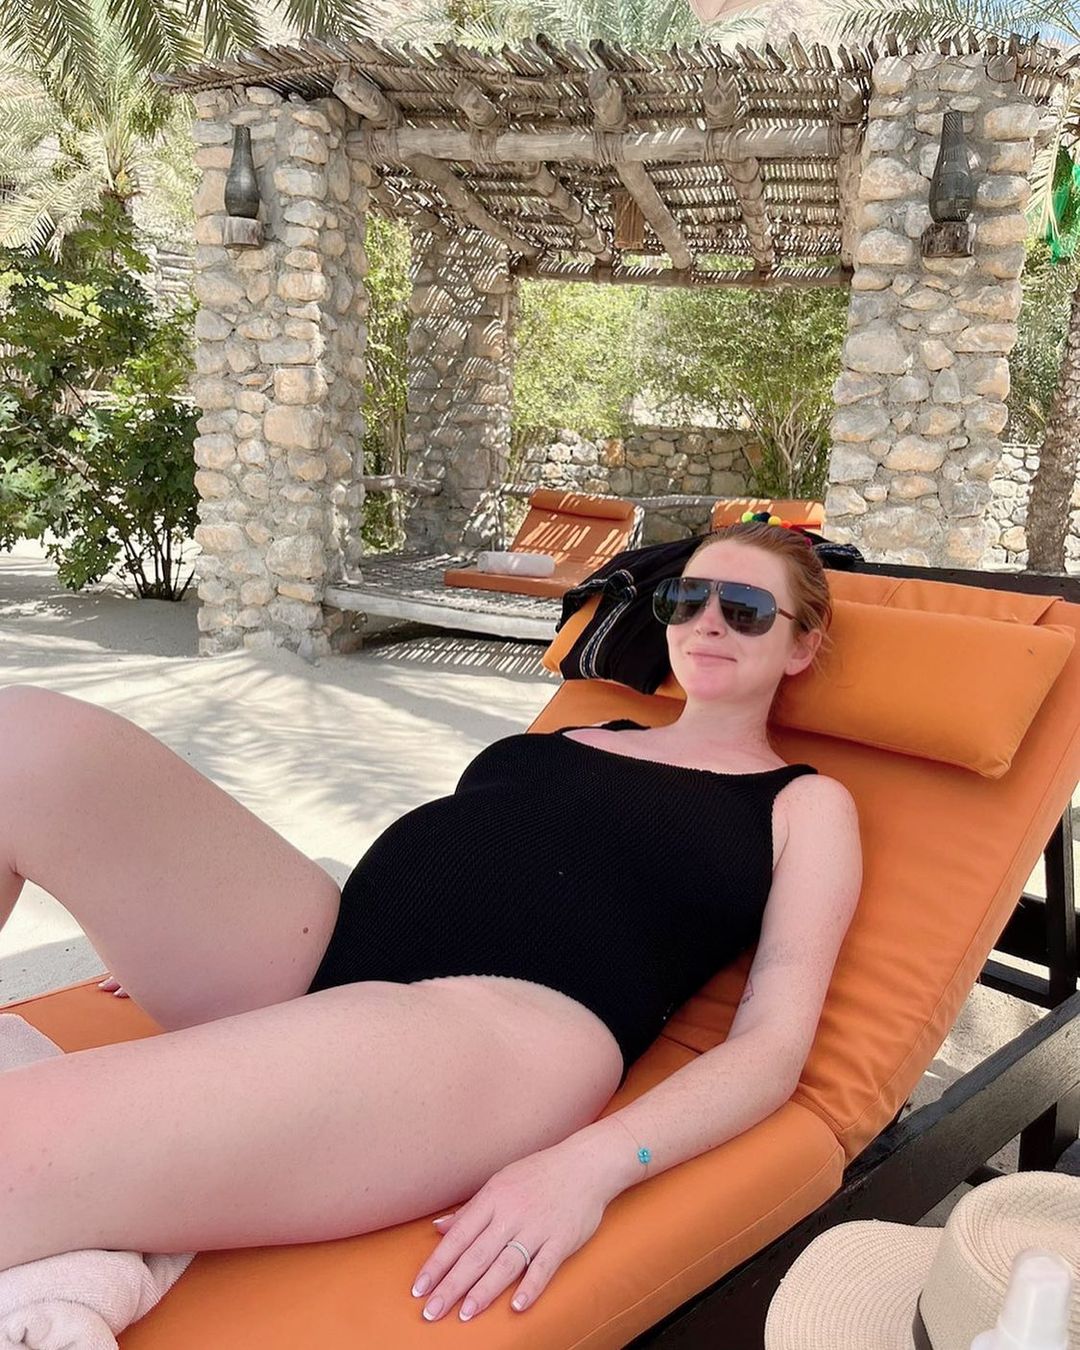 Lindsay Lohan Lays Back With Her Growing Bump!